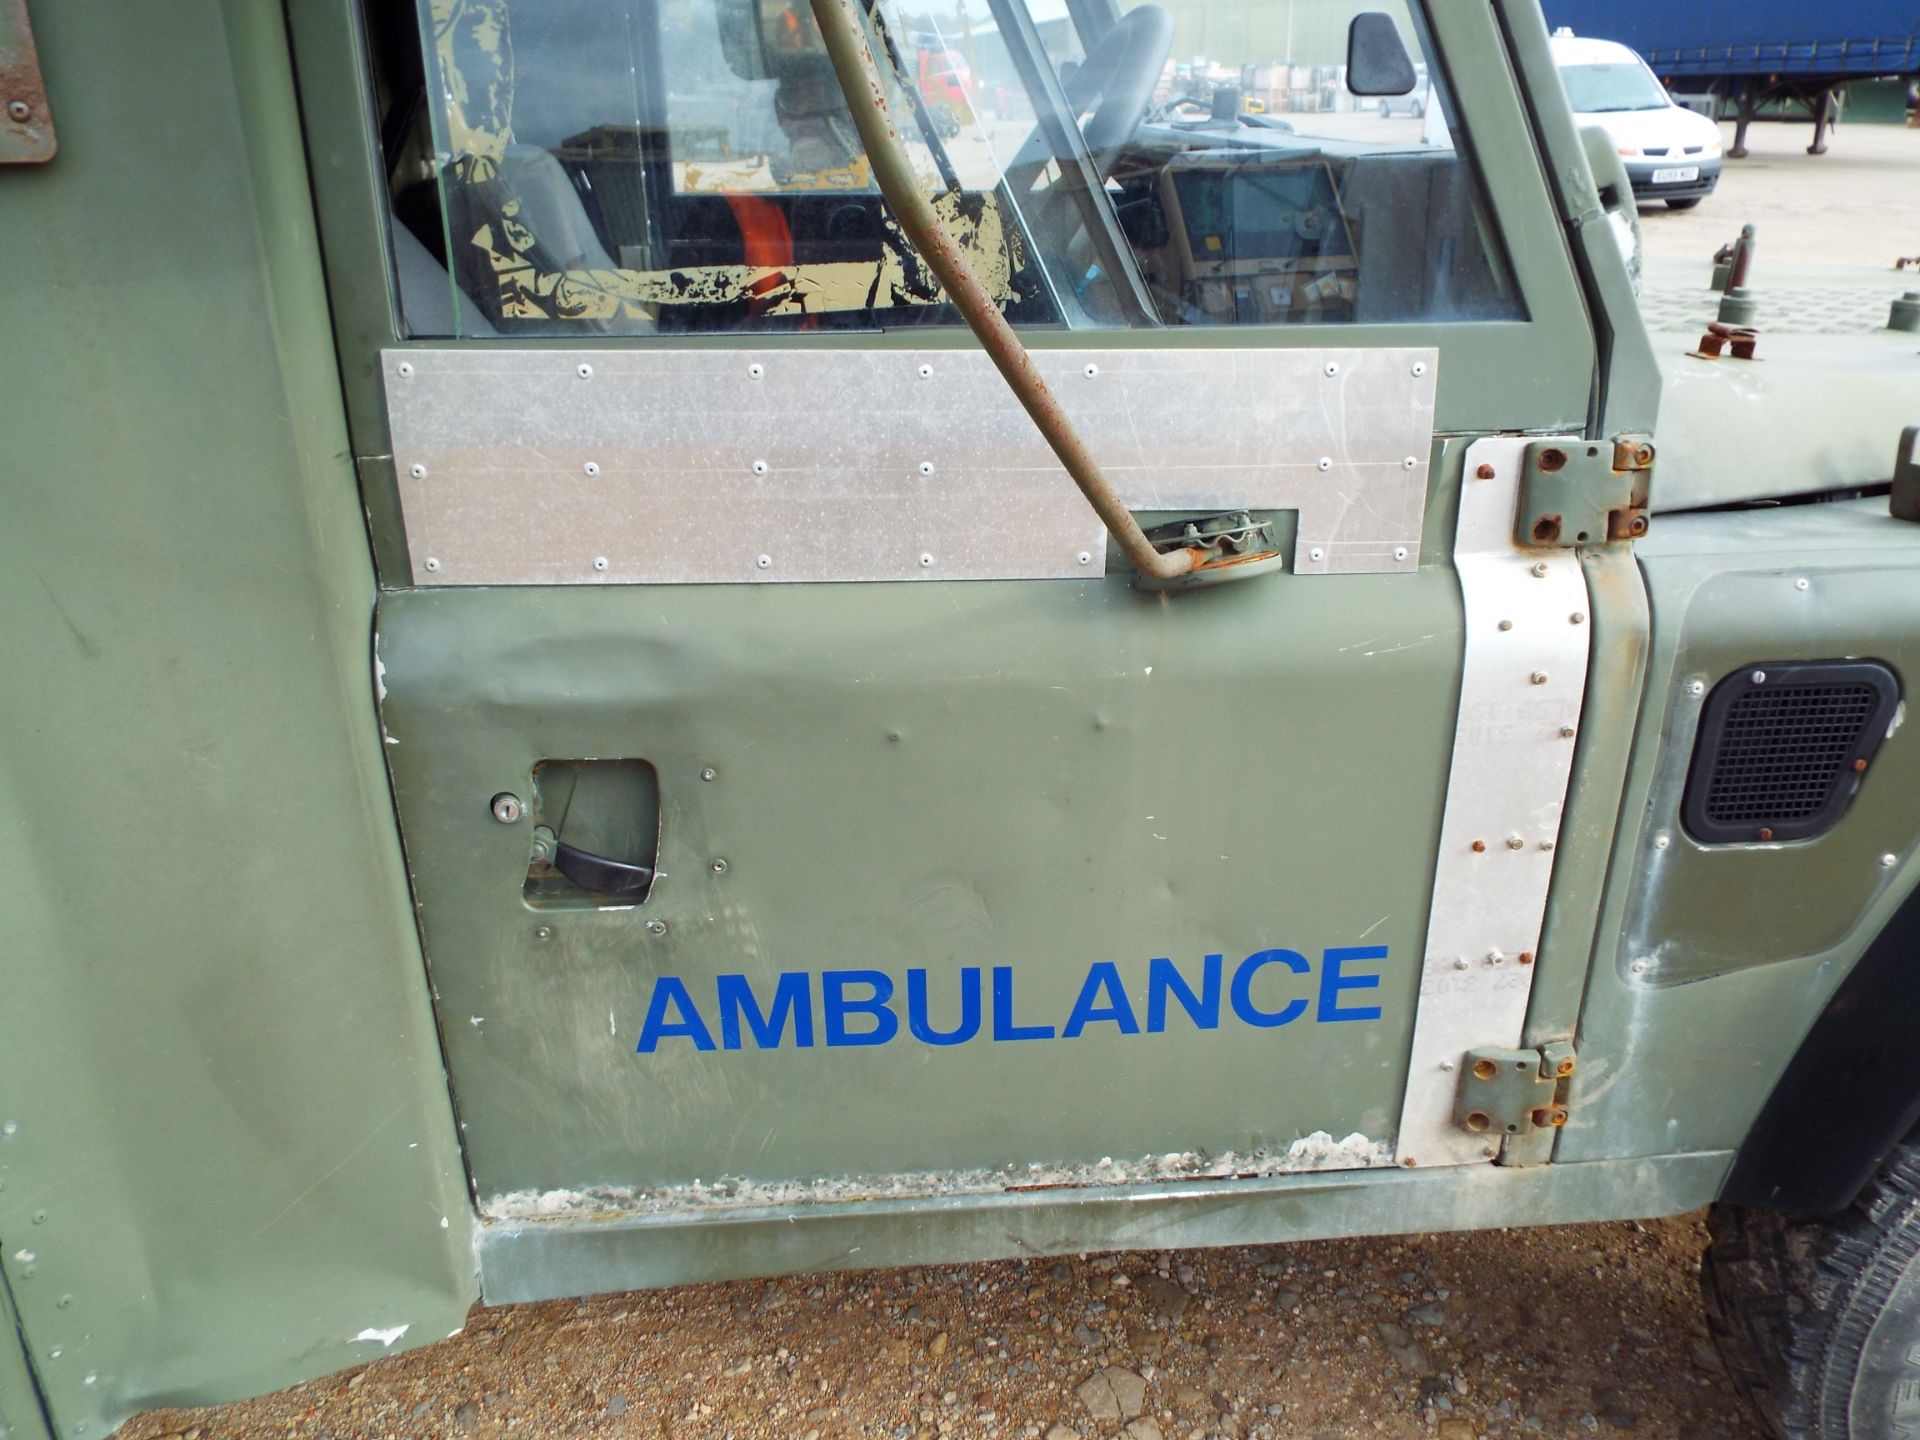 Military Specification Land Rover Wolf 130 ambulance - Image 24 of 28